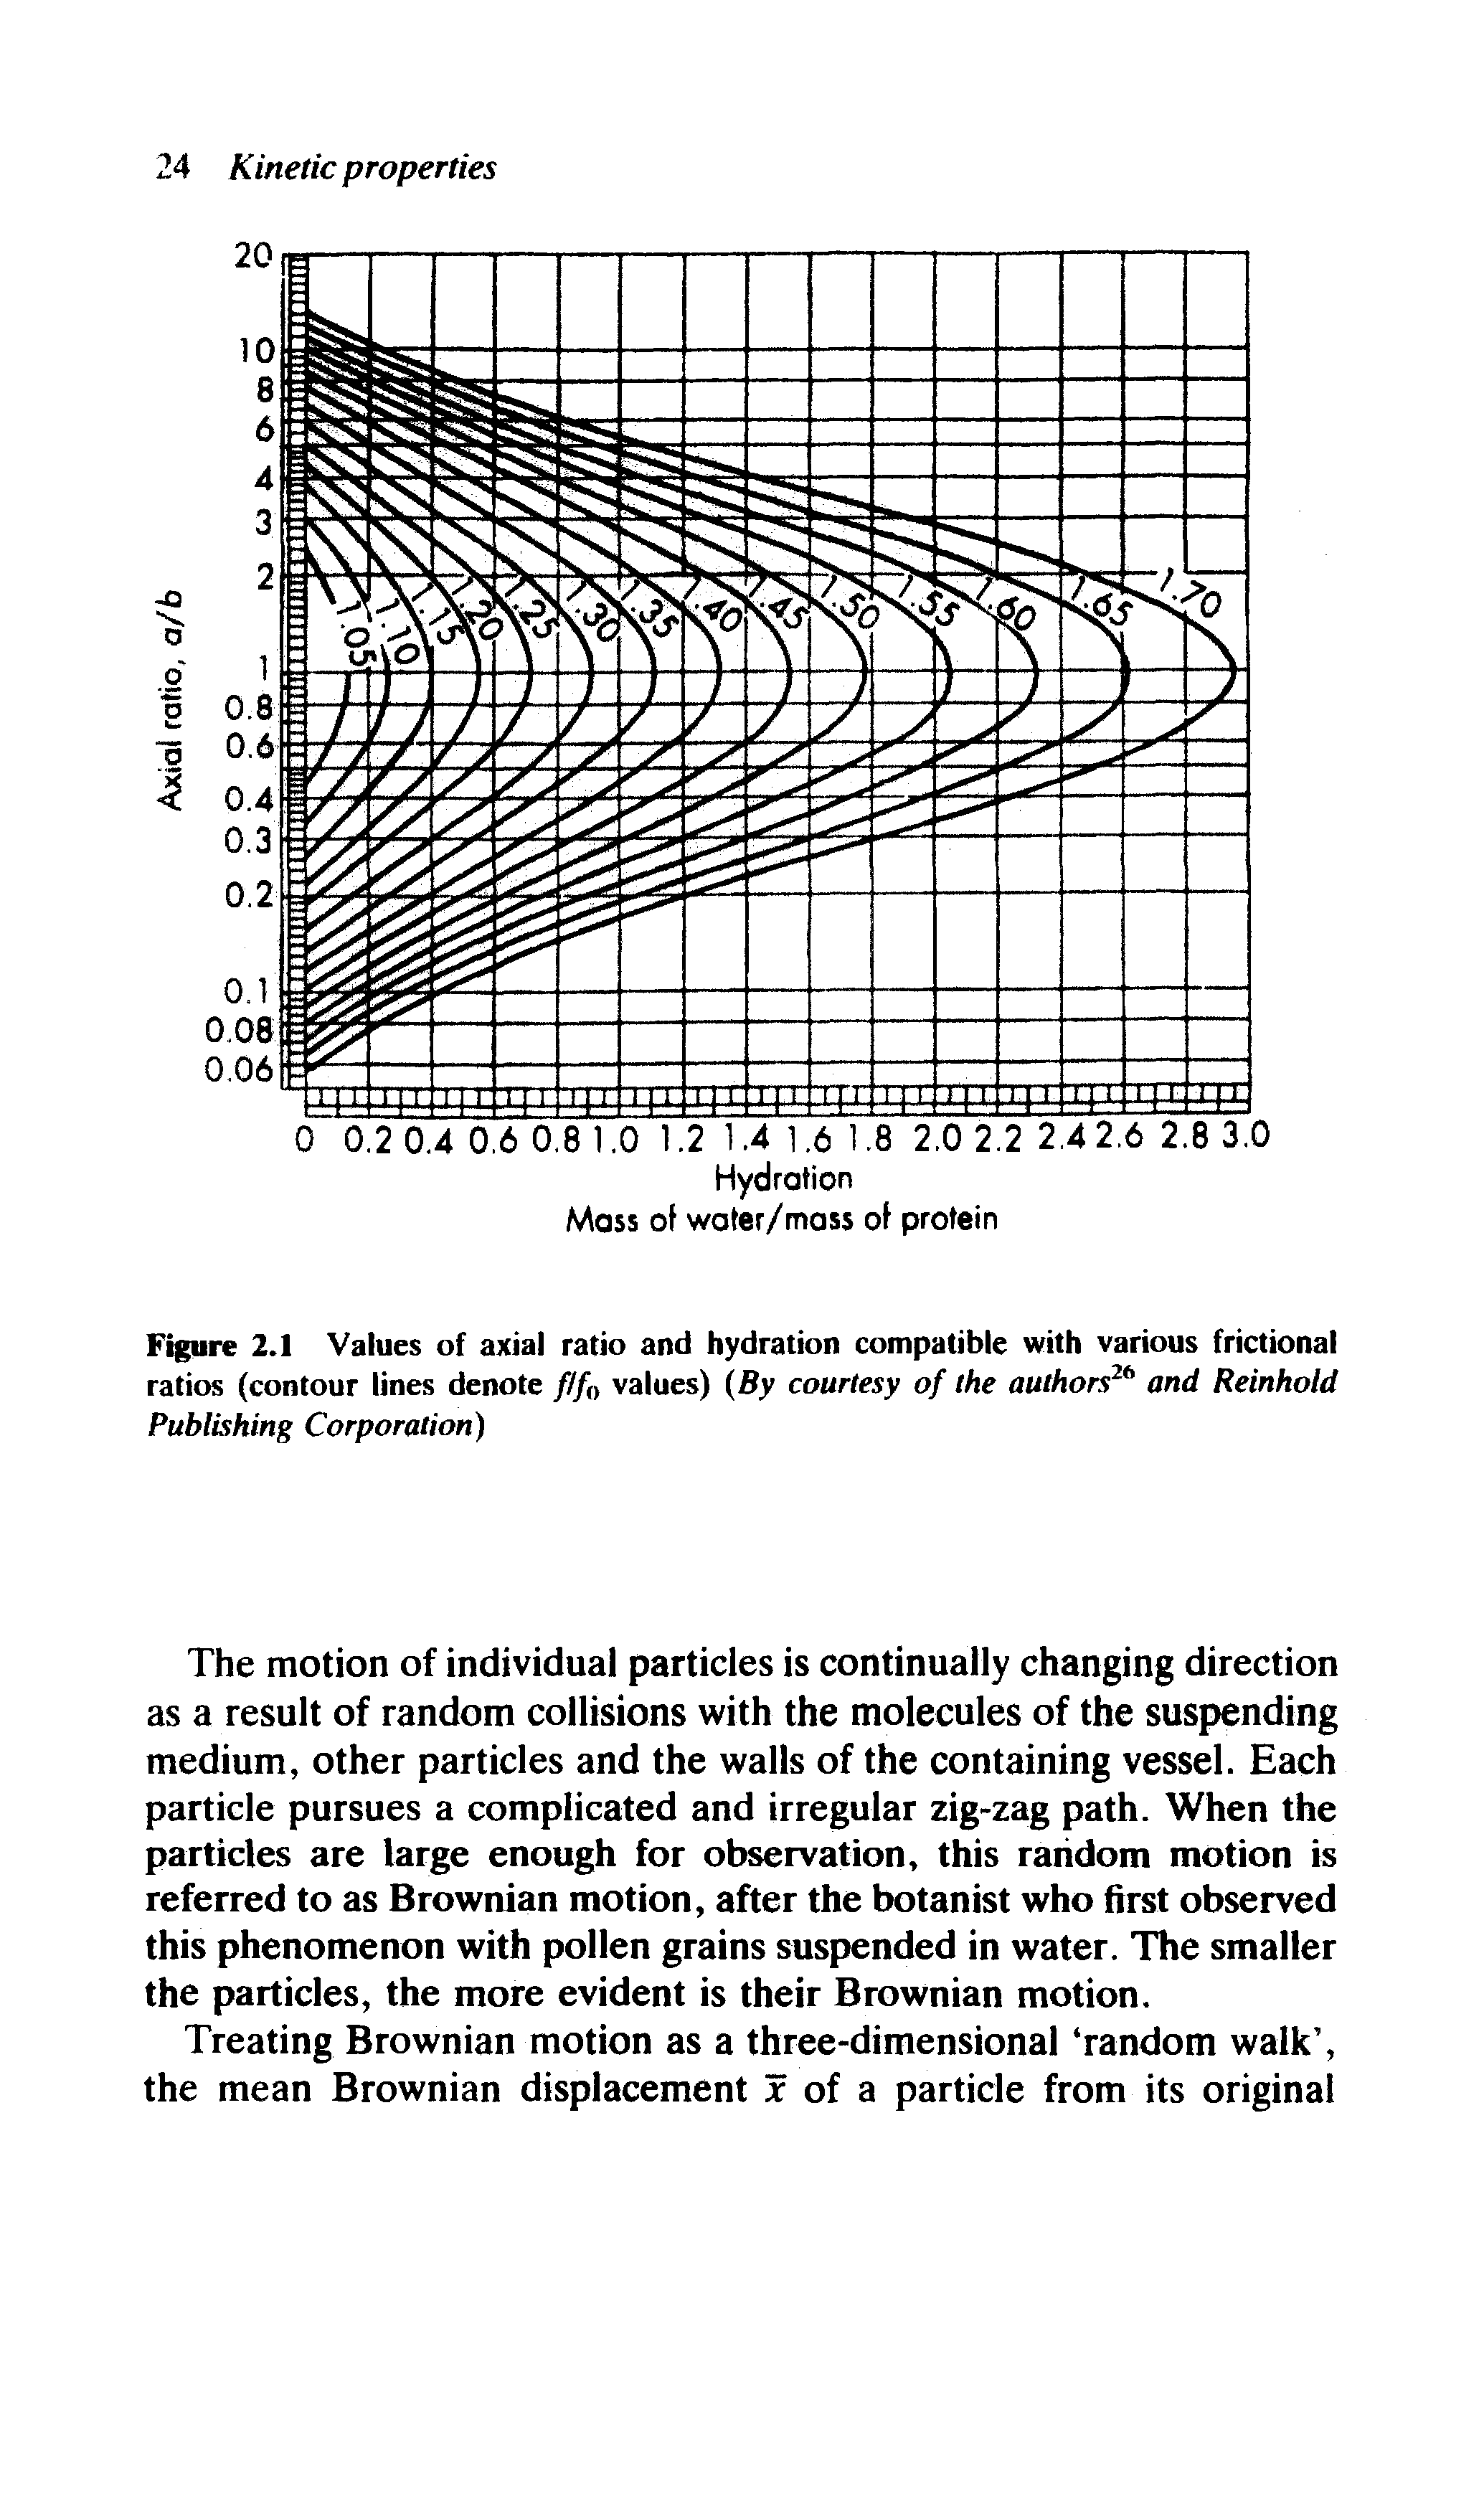 Figure 2.1 Values of axial ratio and hydration compatible with various frictional ratios (contour lines denote ///, values) (By courtesy of the authors26 and Reinhold Publishing Corporation)...